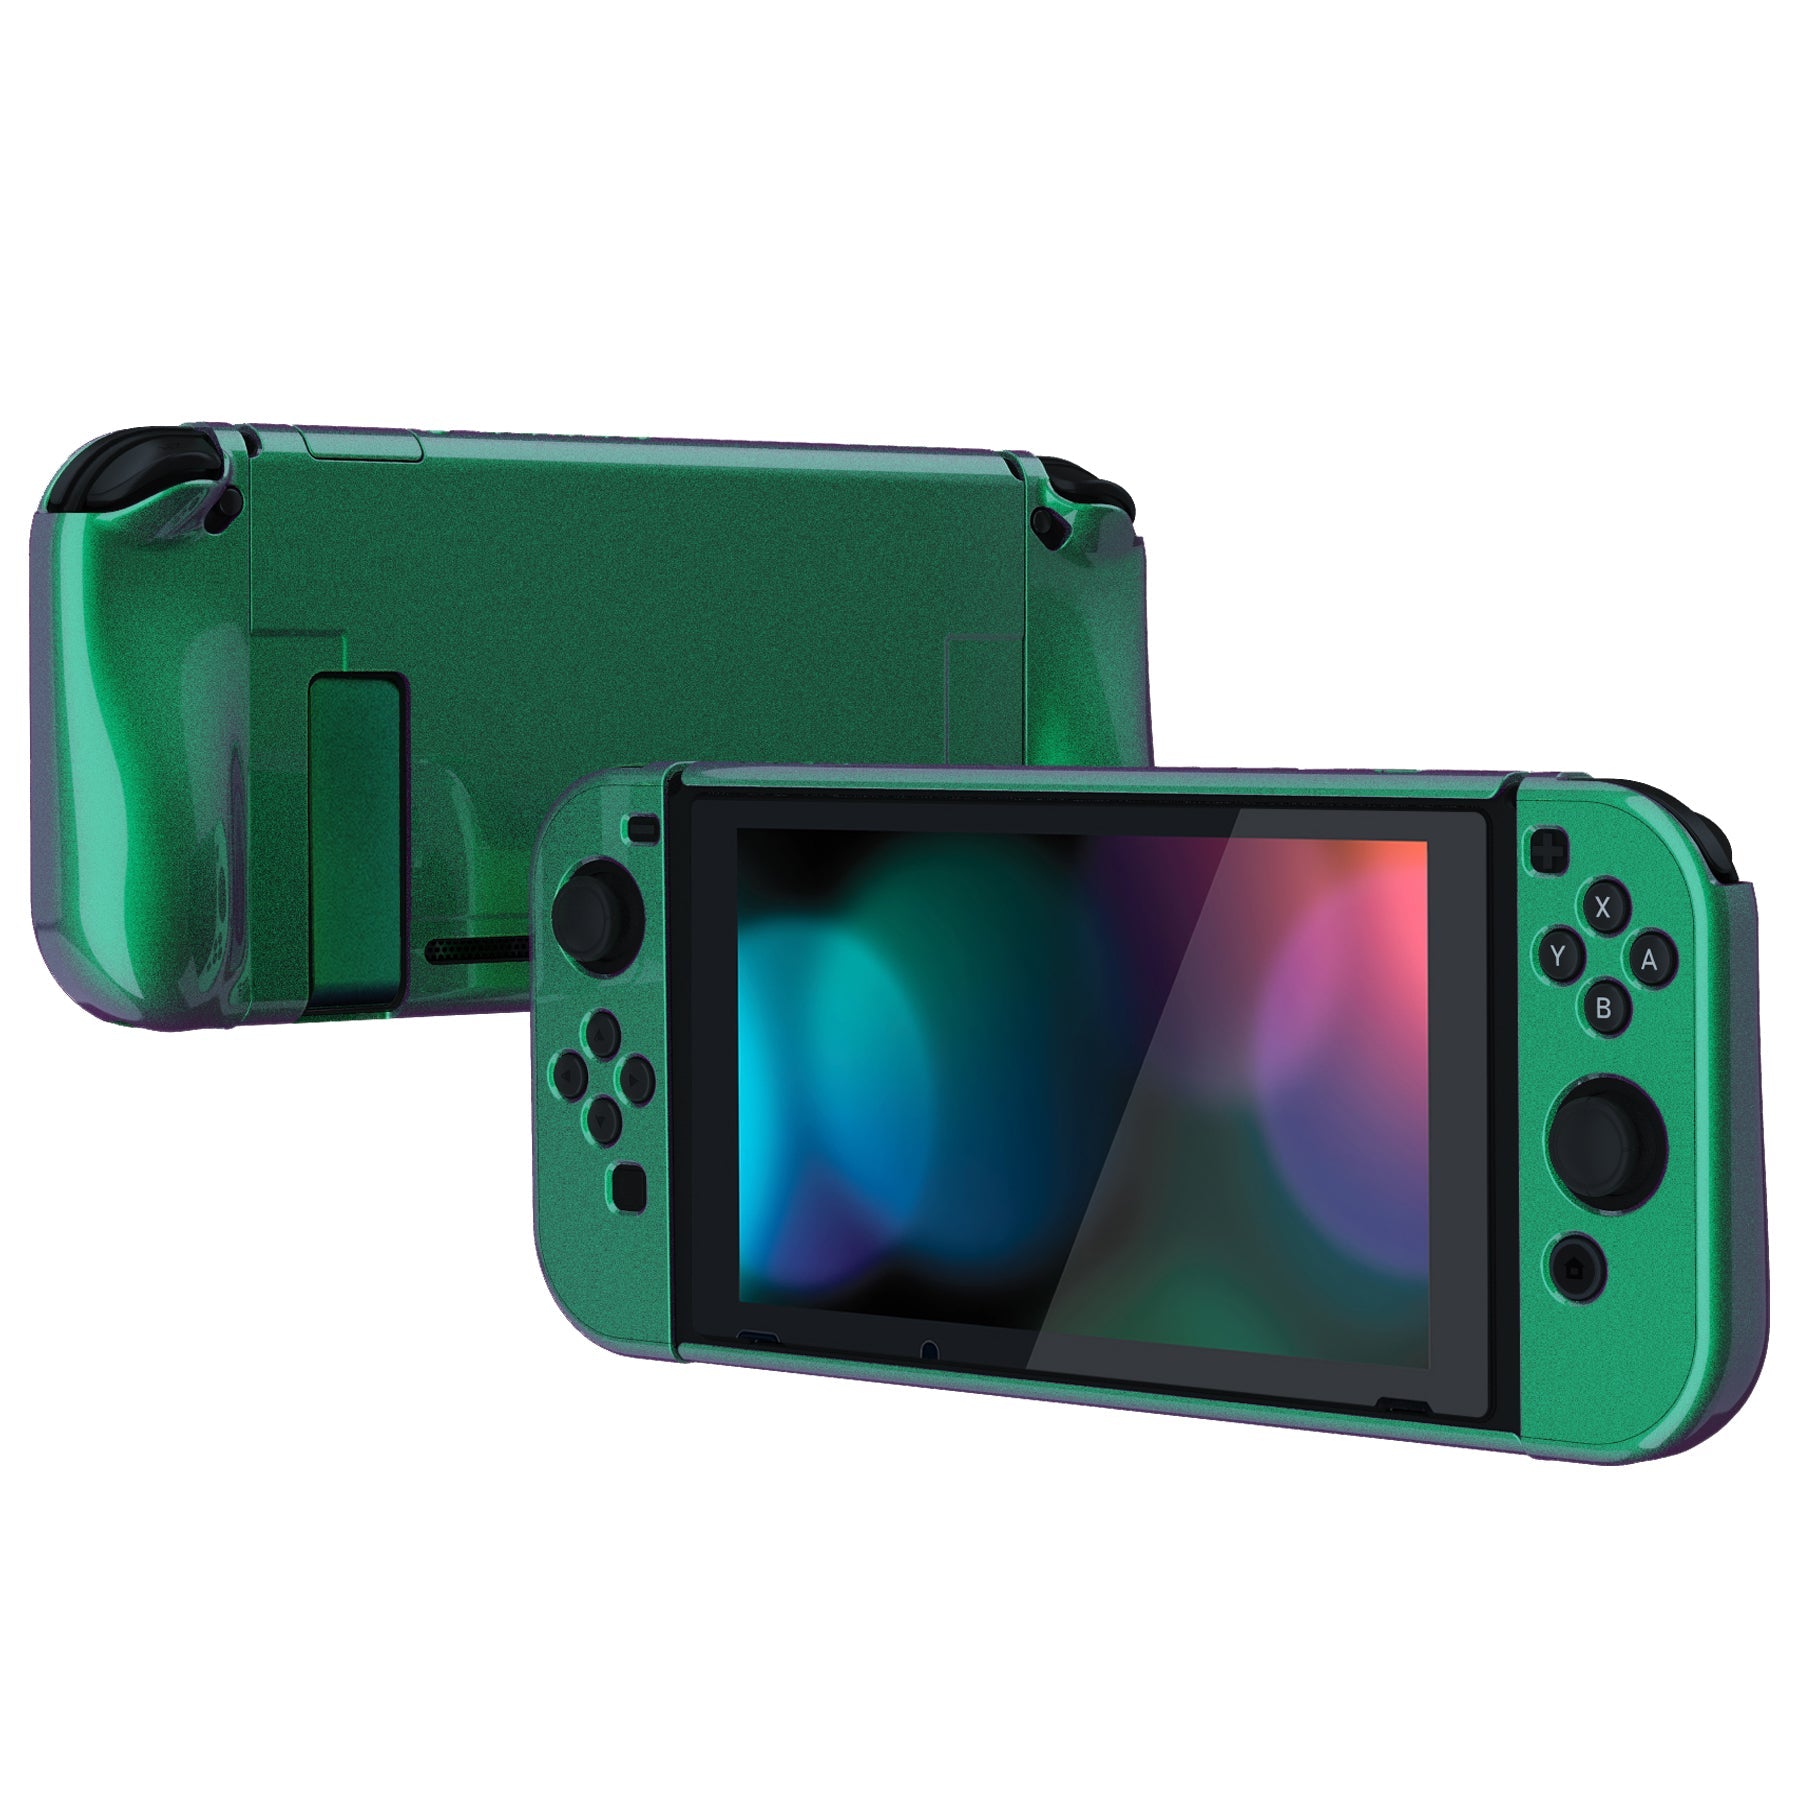 PlayVital UPGRADED Glossy Dockable Case Grip Cover for NS Switch, Ergonomic Protective Case for NS Switch, Separable Protector Hard Shell for Joycon - Chameleon Green Purple - ANSP3002 PlayVital